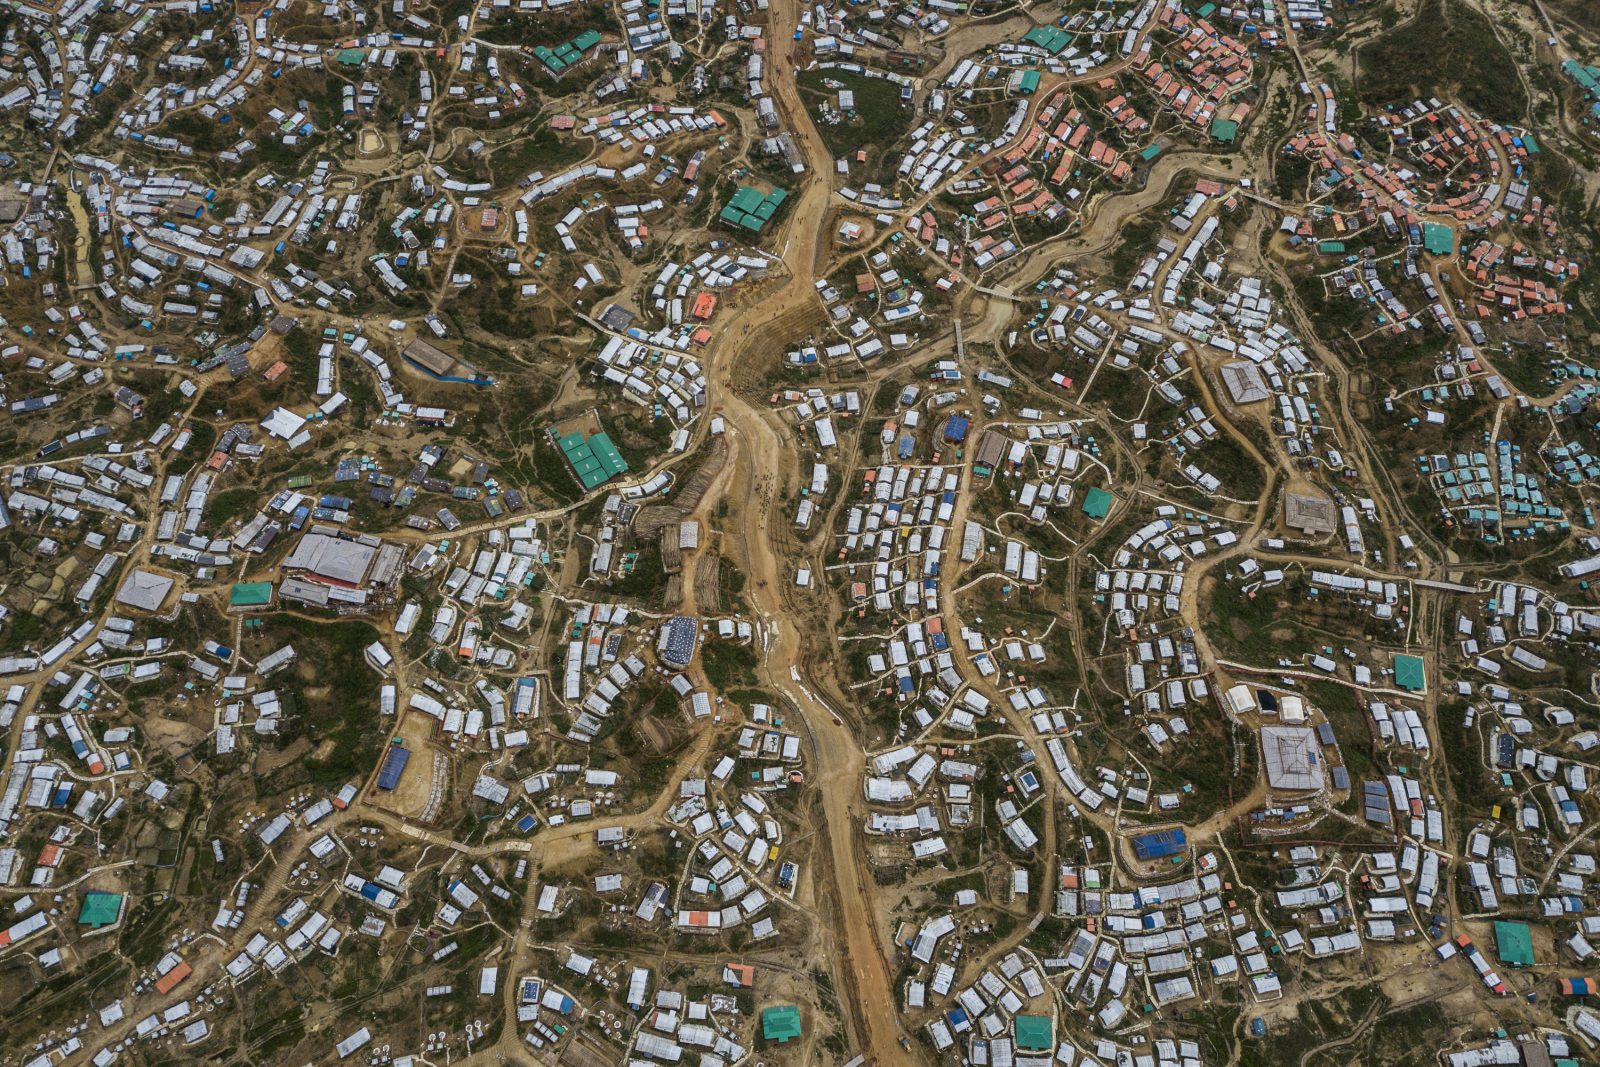 An aerial view of the densely packed Kutupalong refugee camp in Bangladesh where more than 500,000 Rohingya refugees now live.